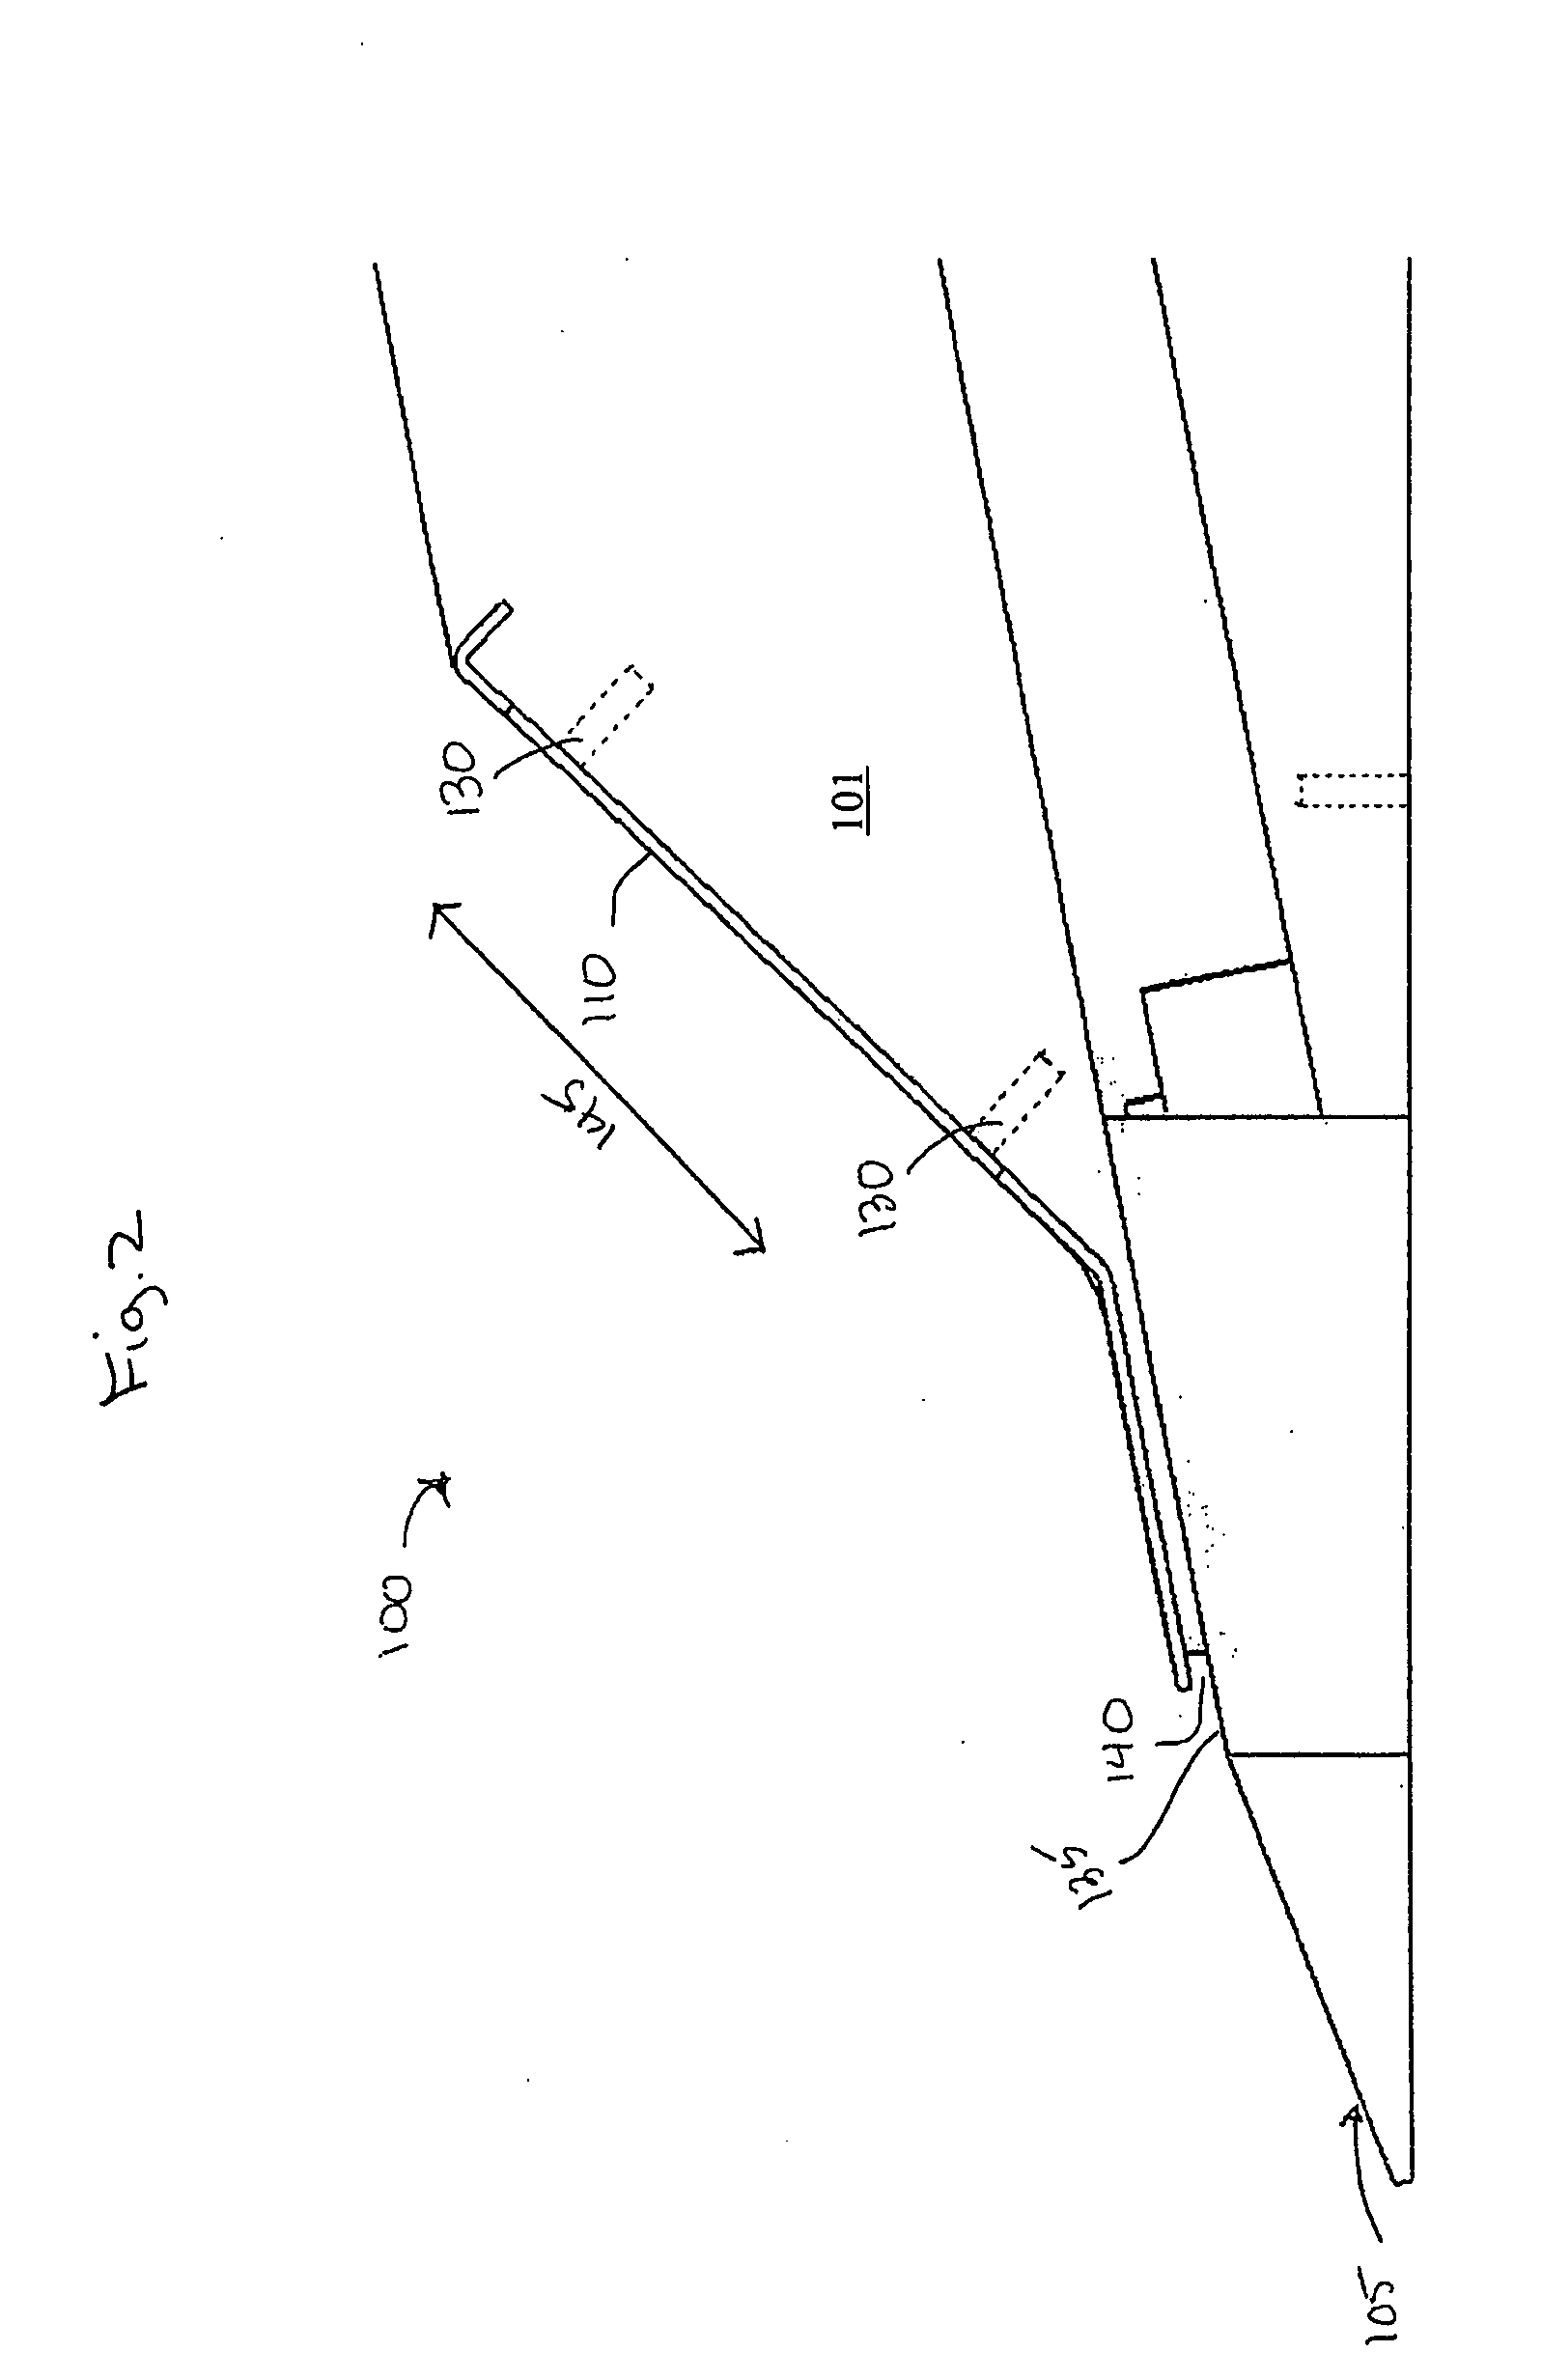 Card delivery shoe and methods of fabricating the card delivery shoe